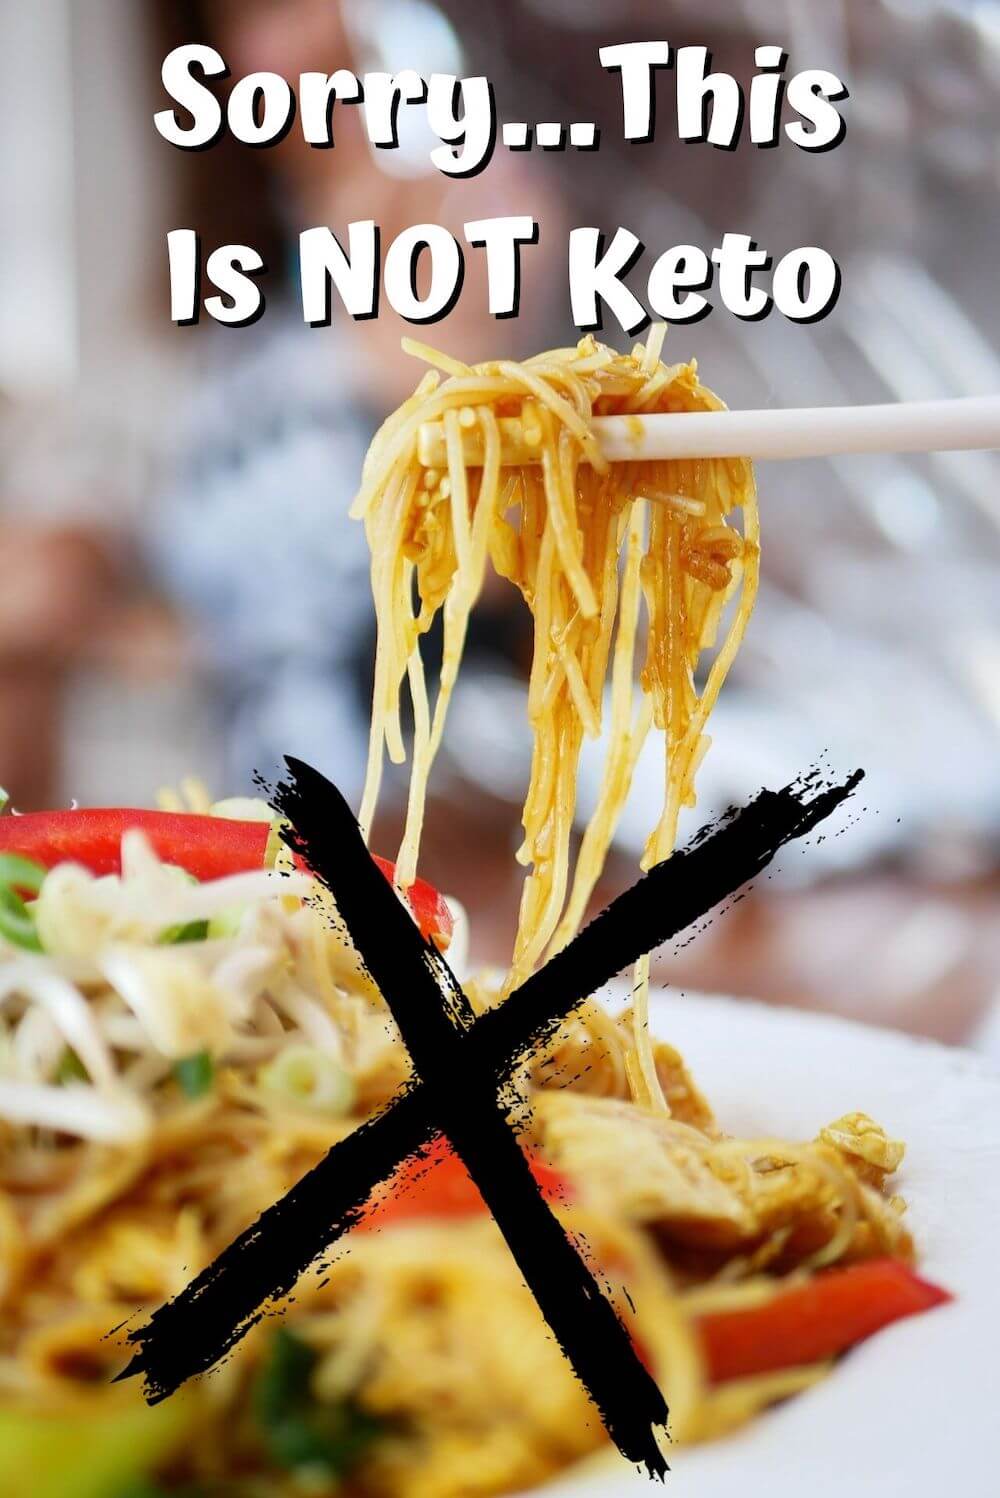 Sorry, you cannot order noodles. These are not Keto Chinese food!